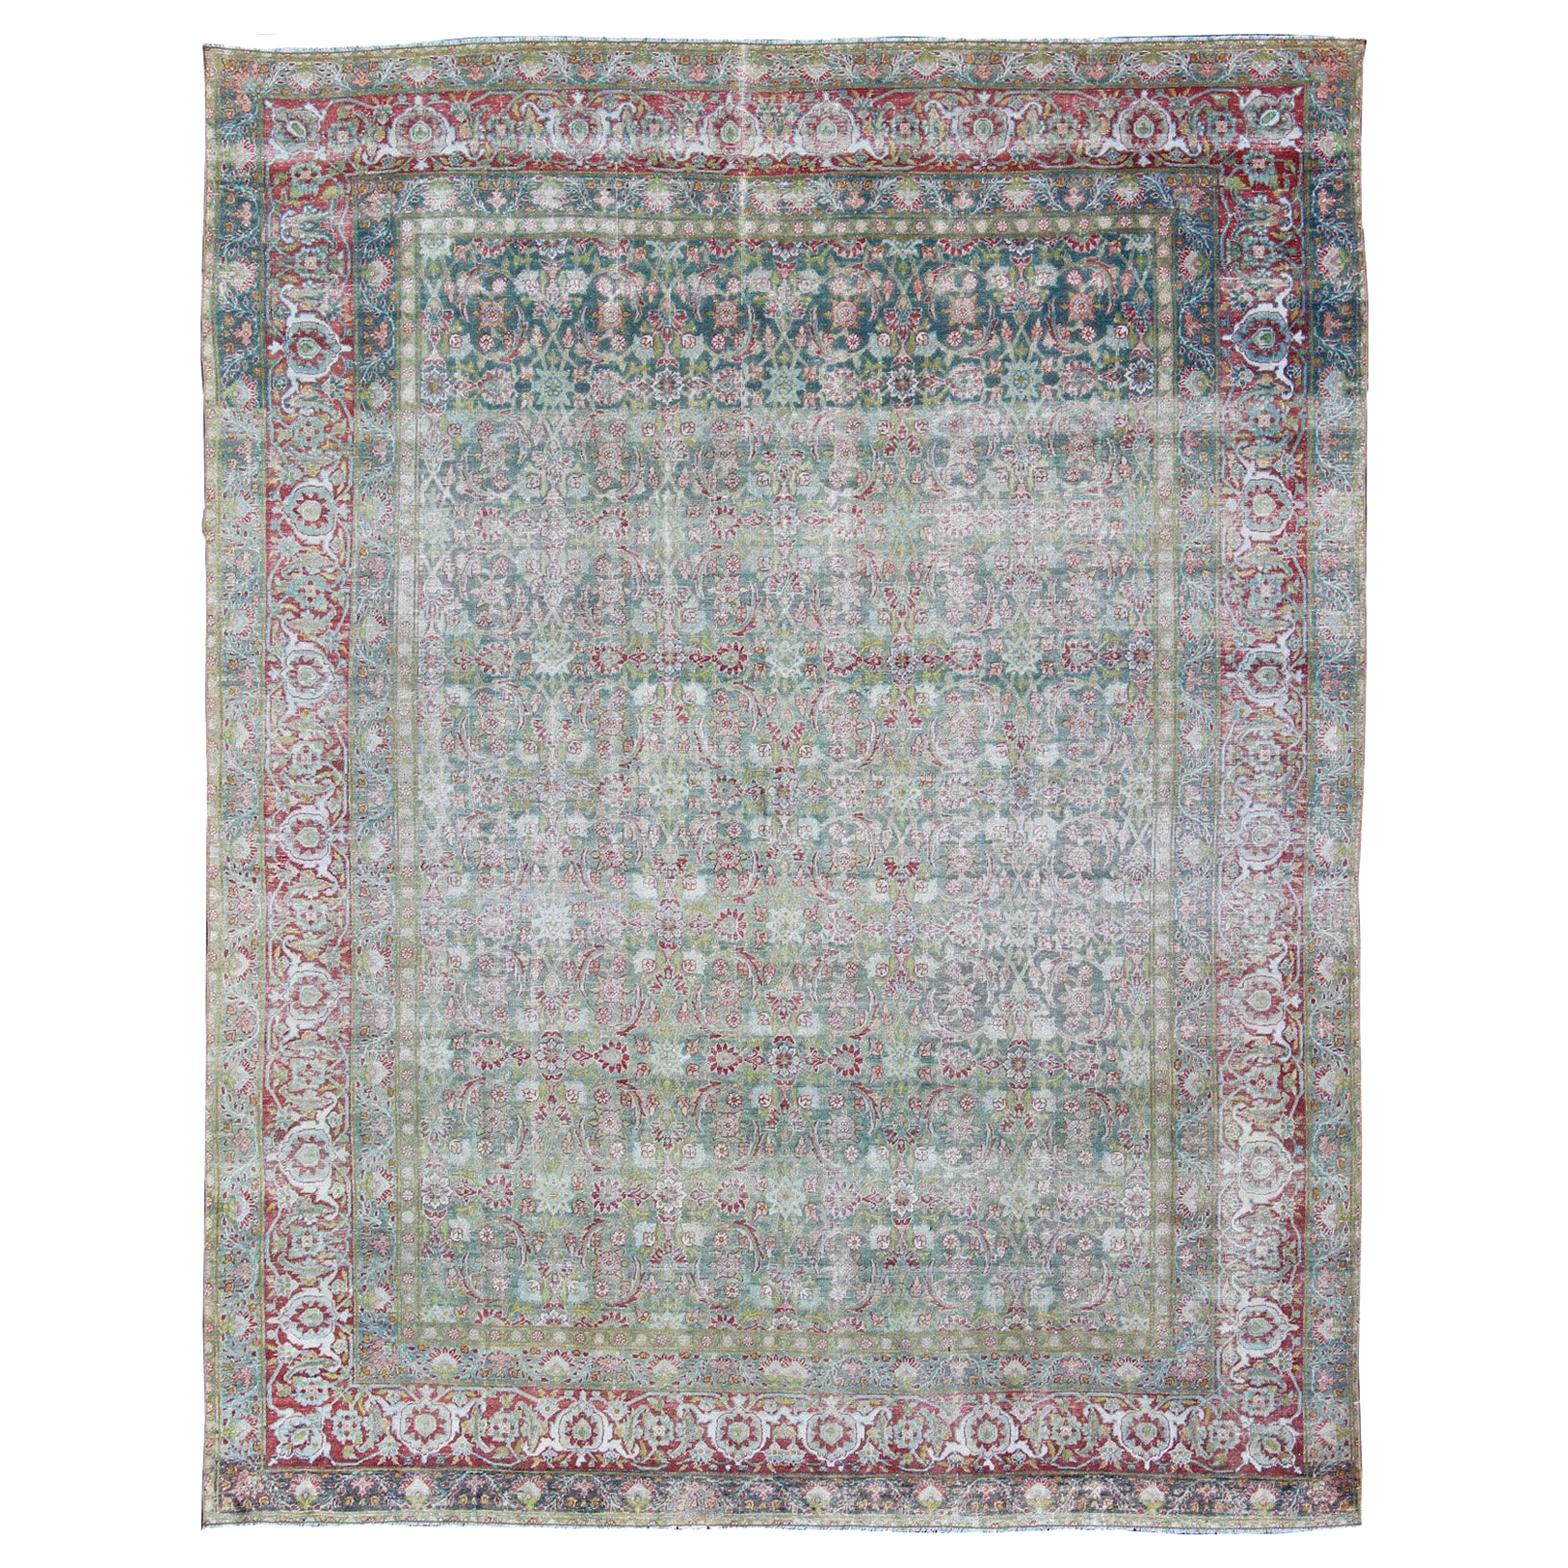 Antique Persian Kerman Lavar Rug with Geometric Leaf and Flower Herati Motifs For Sale